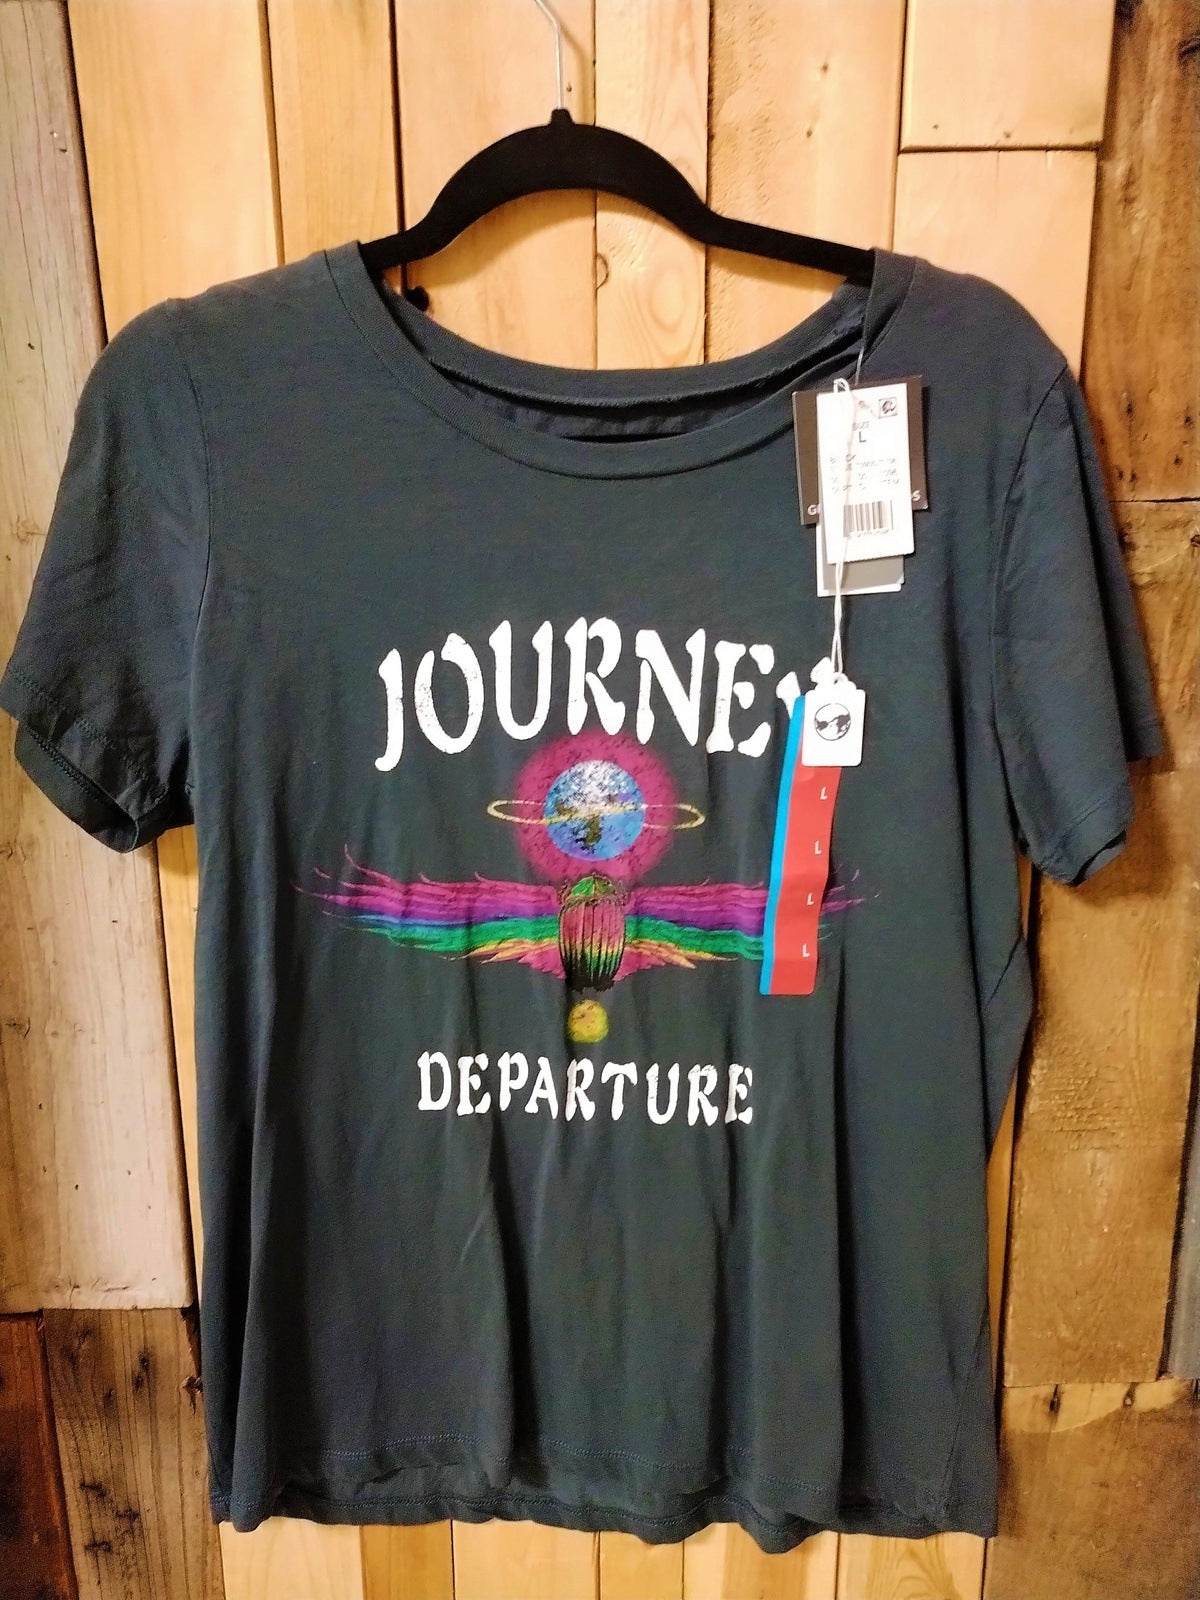 Journey "Departure" Women's T Shirt Size Large New with Tags